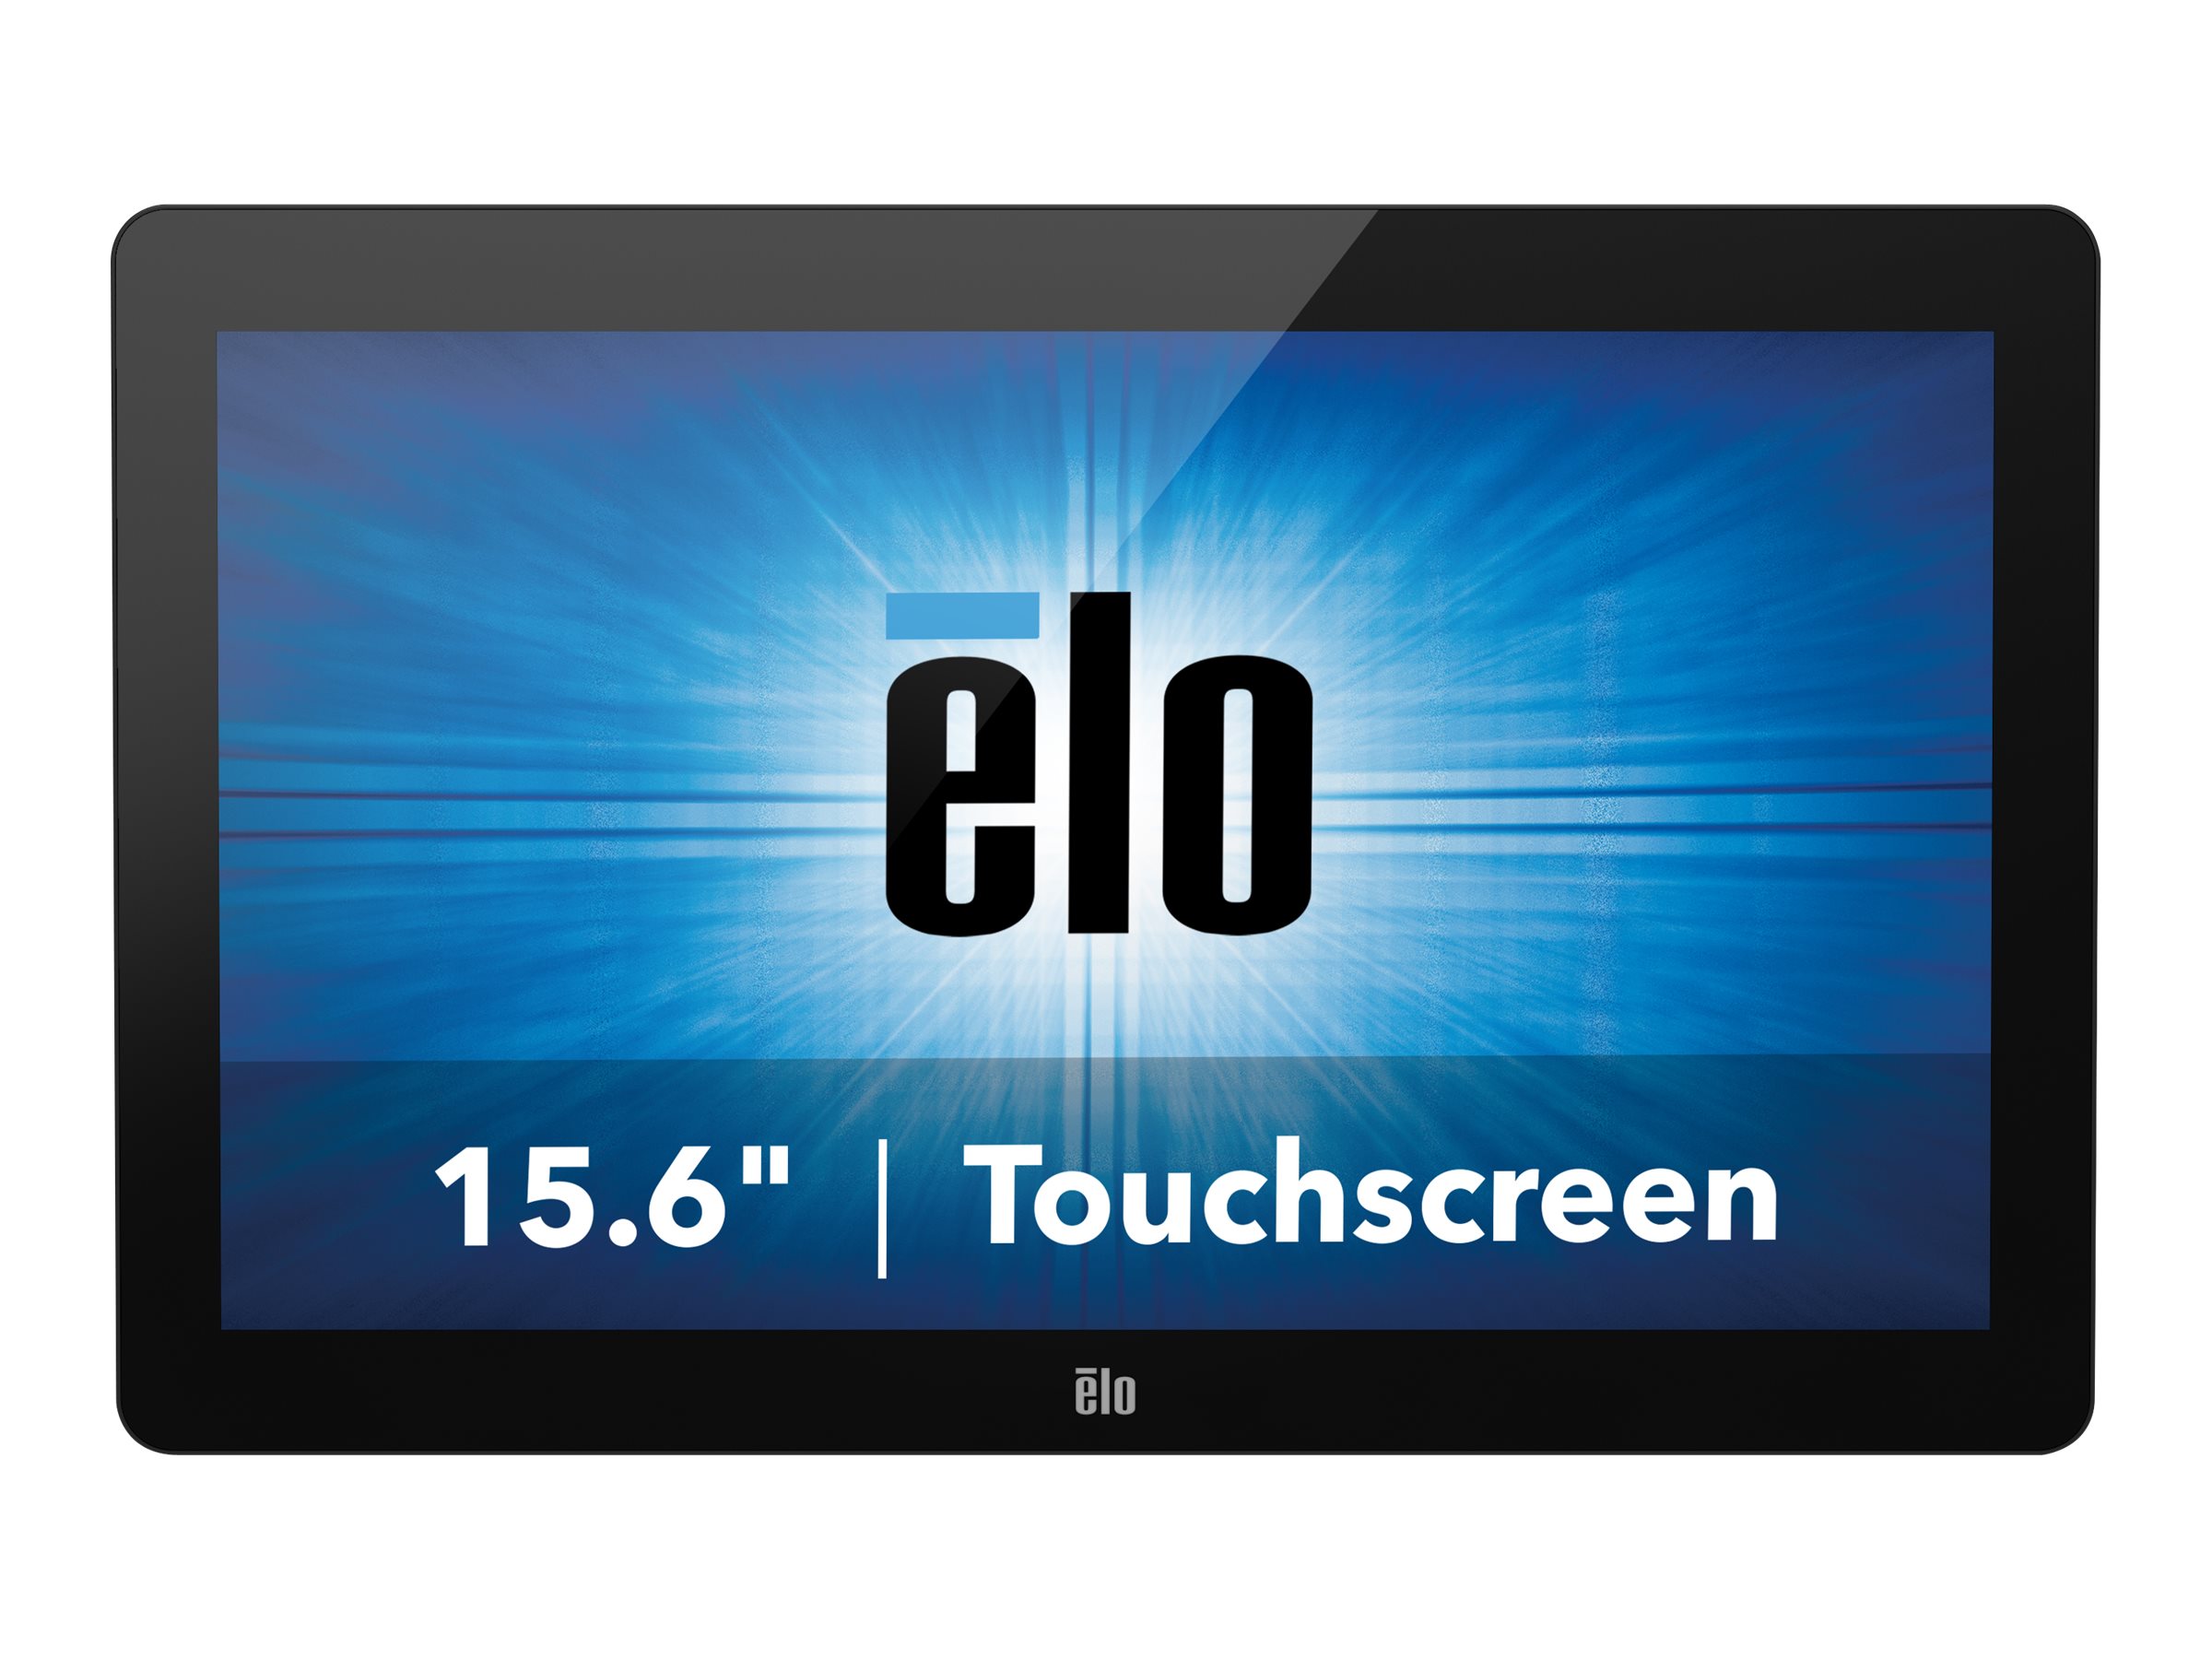 Elo Touch Solutions Elo 1502L - M-Series - LED-Monitor - 39.6 cm (15.6")